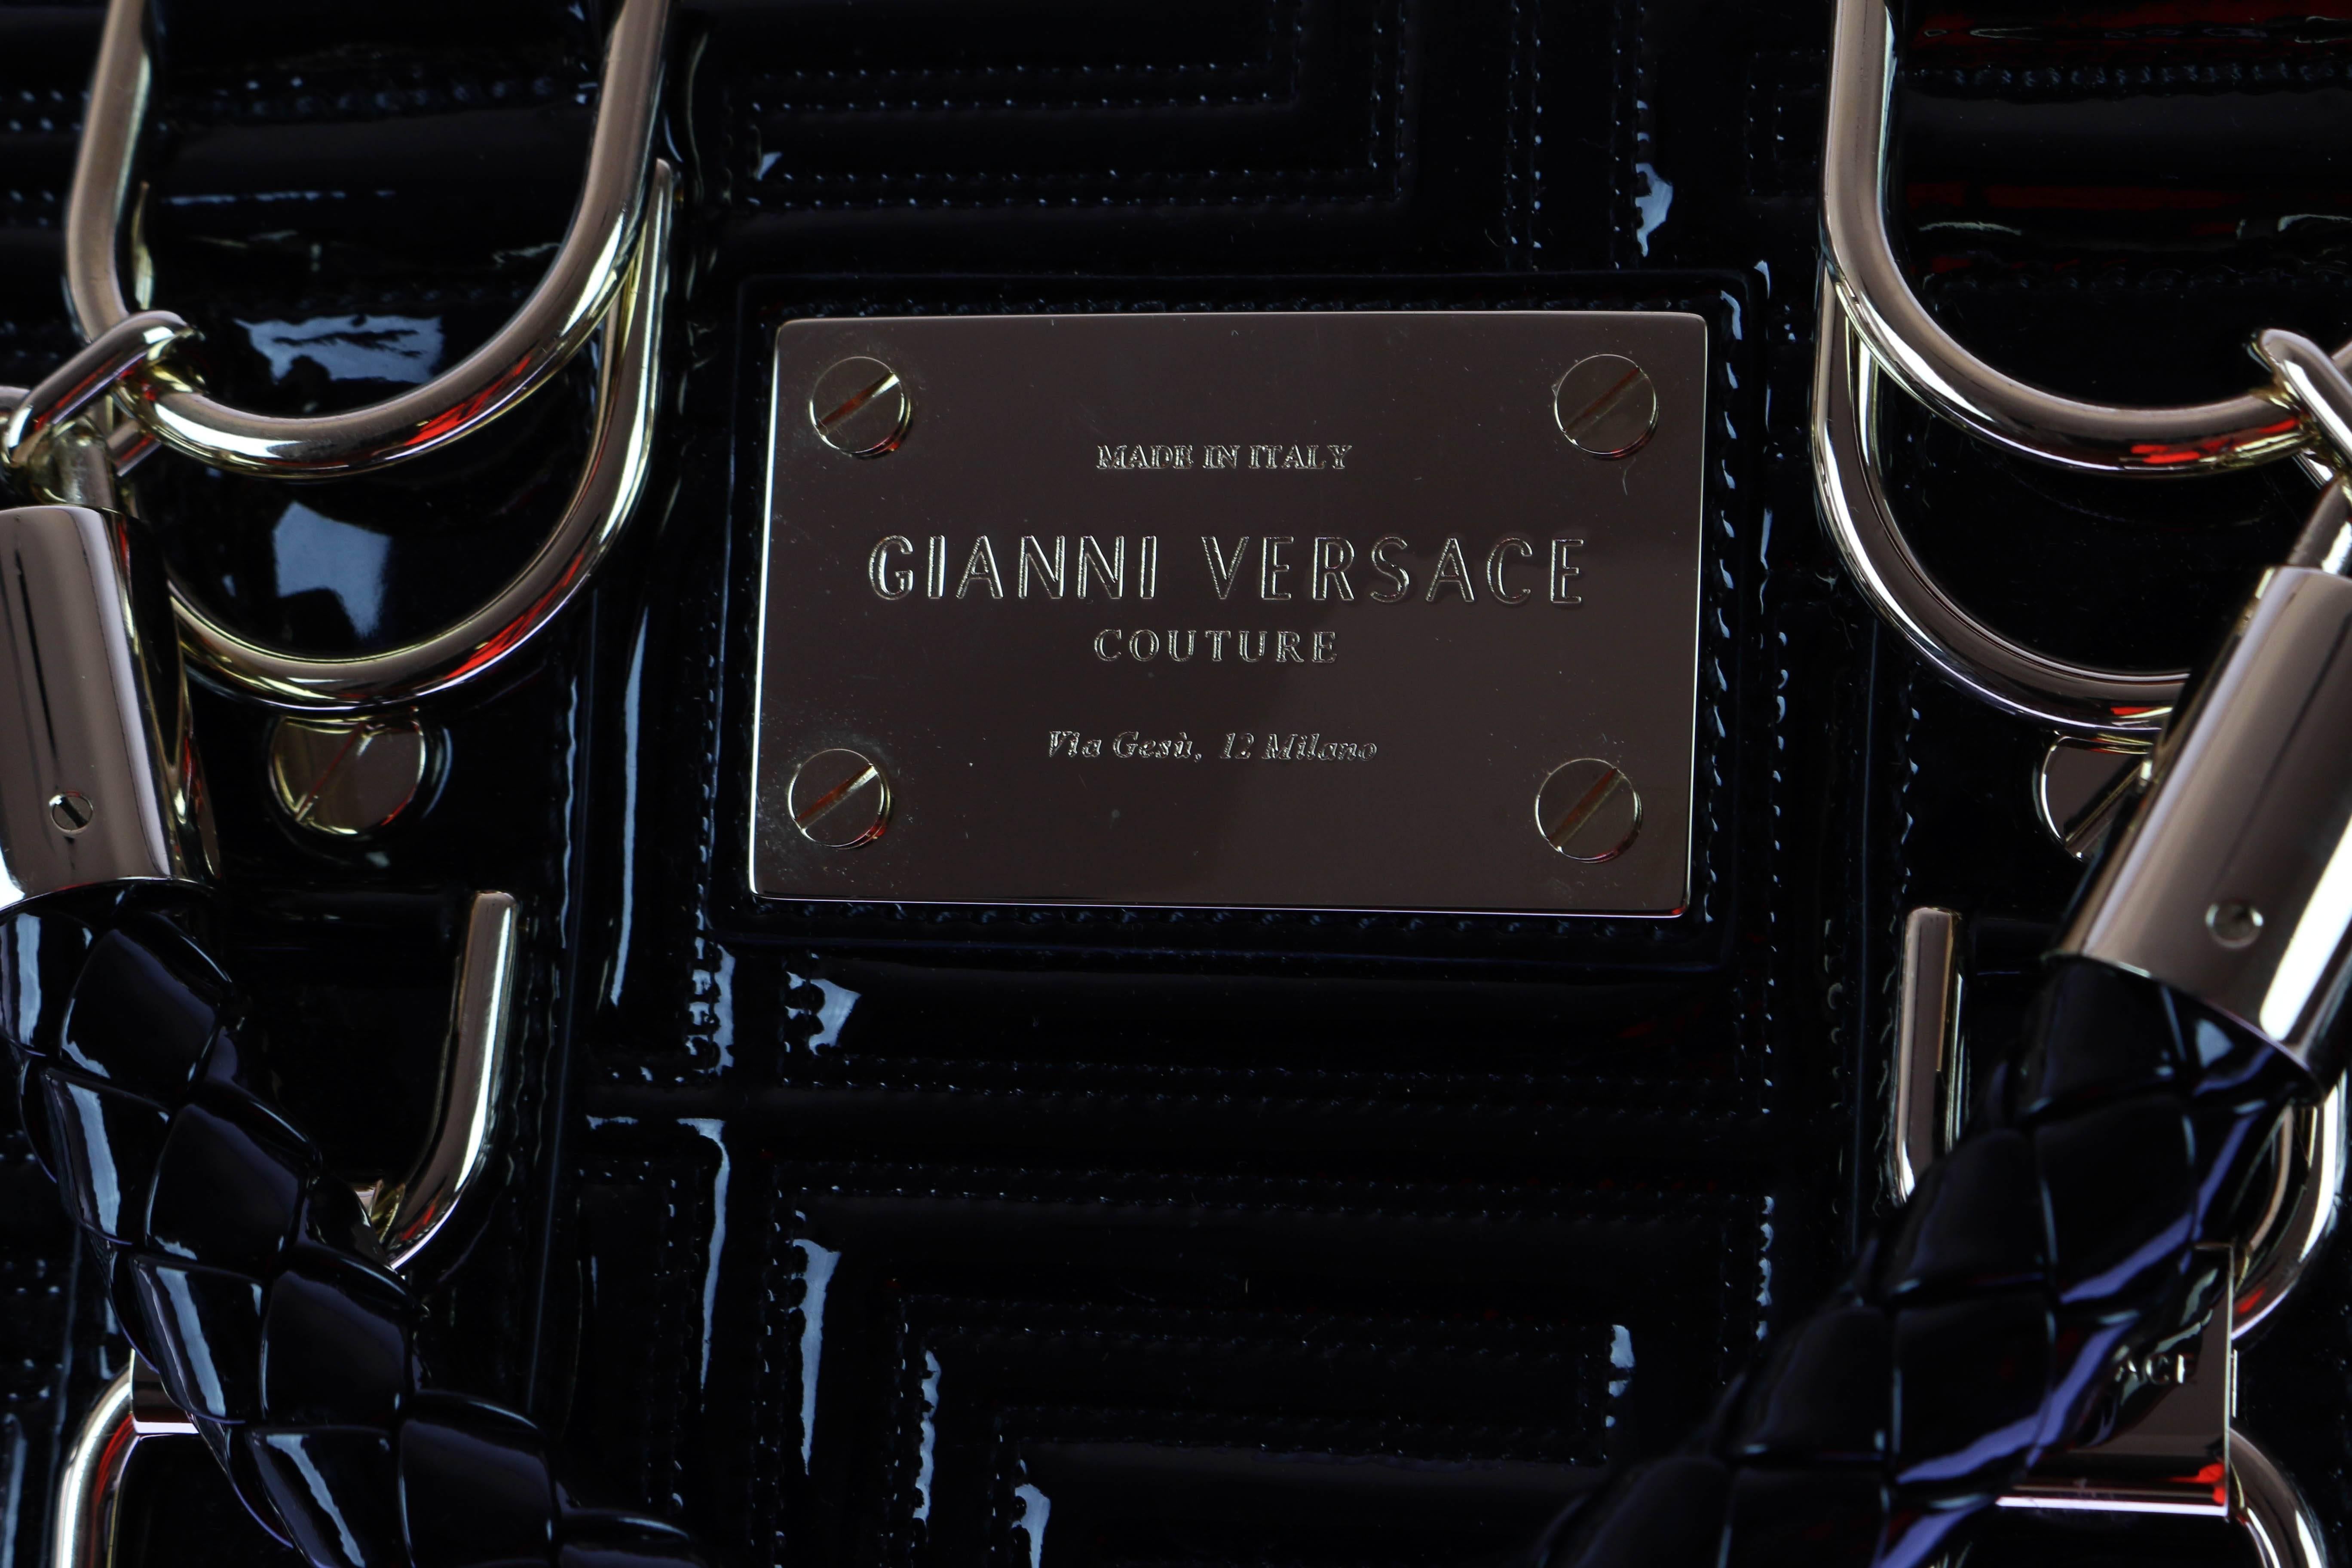 
GIANNI VERSACE COUTURE  Patent Leather Bag

 
 Top zip closure
 
 
 Measures 13'' x 8.5'' tall at center x 7''

Six metal feet at base.

Satin lining with interior zip, patch, and cell phone pockets braided leather top handles with 4''